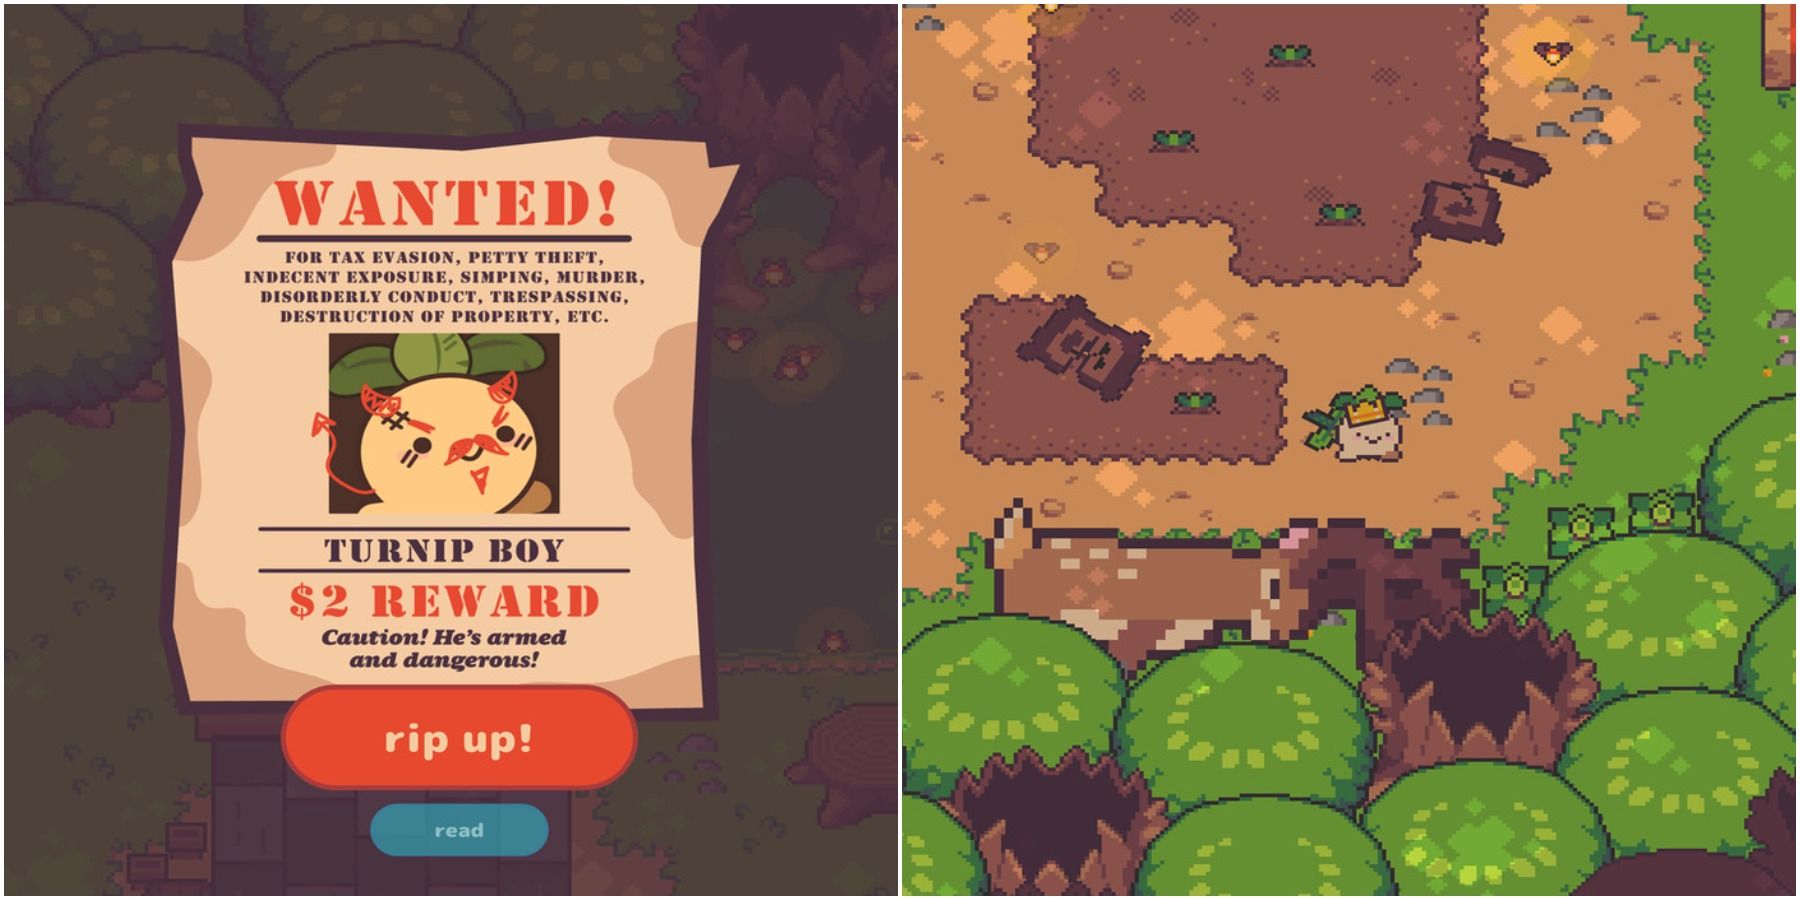 (Left) Wanted poster (Right) Turnip Boy in a forest